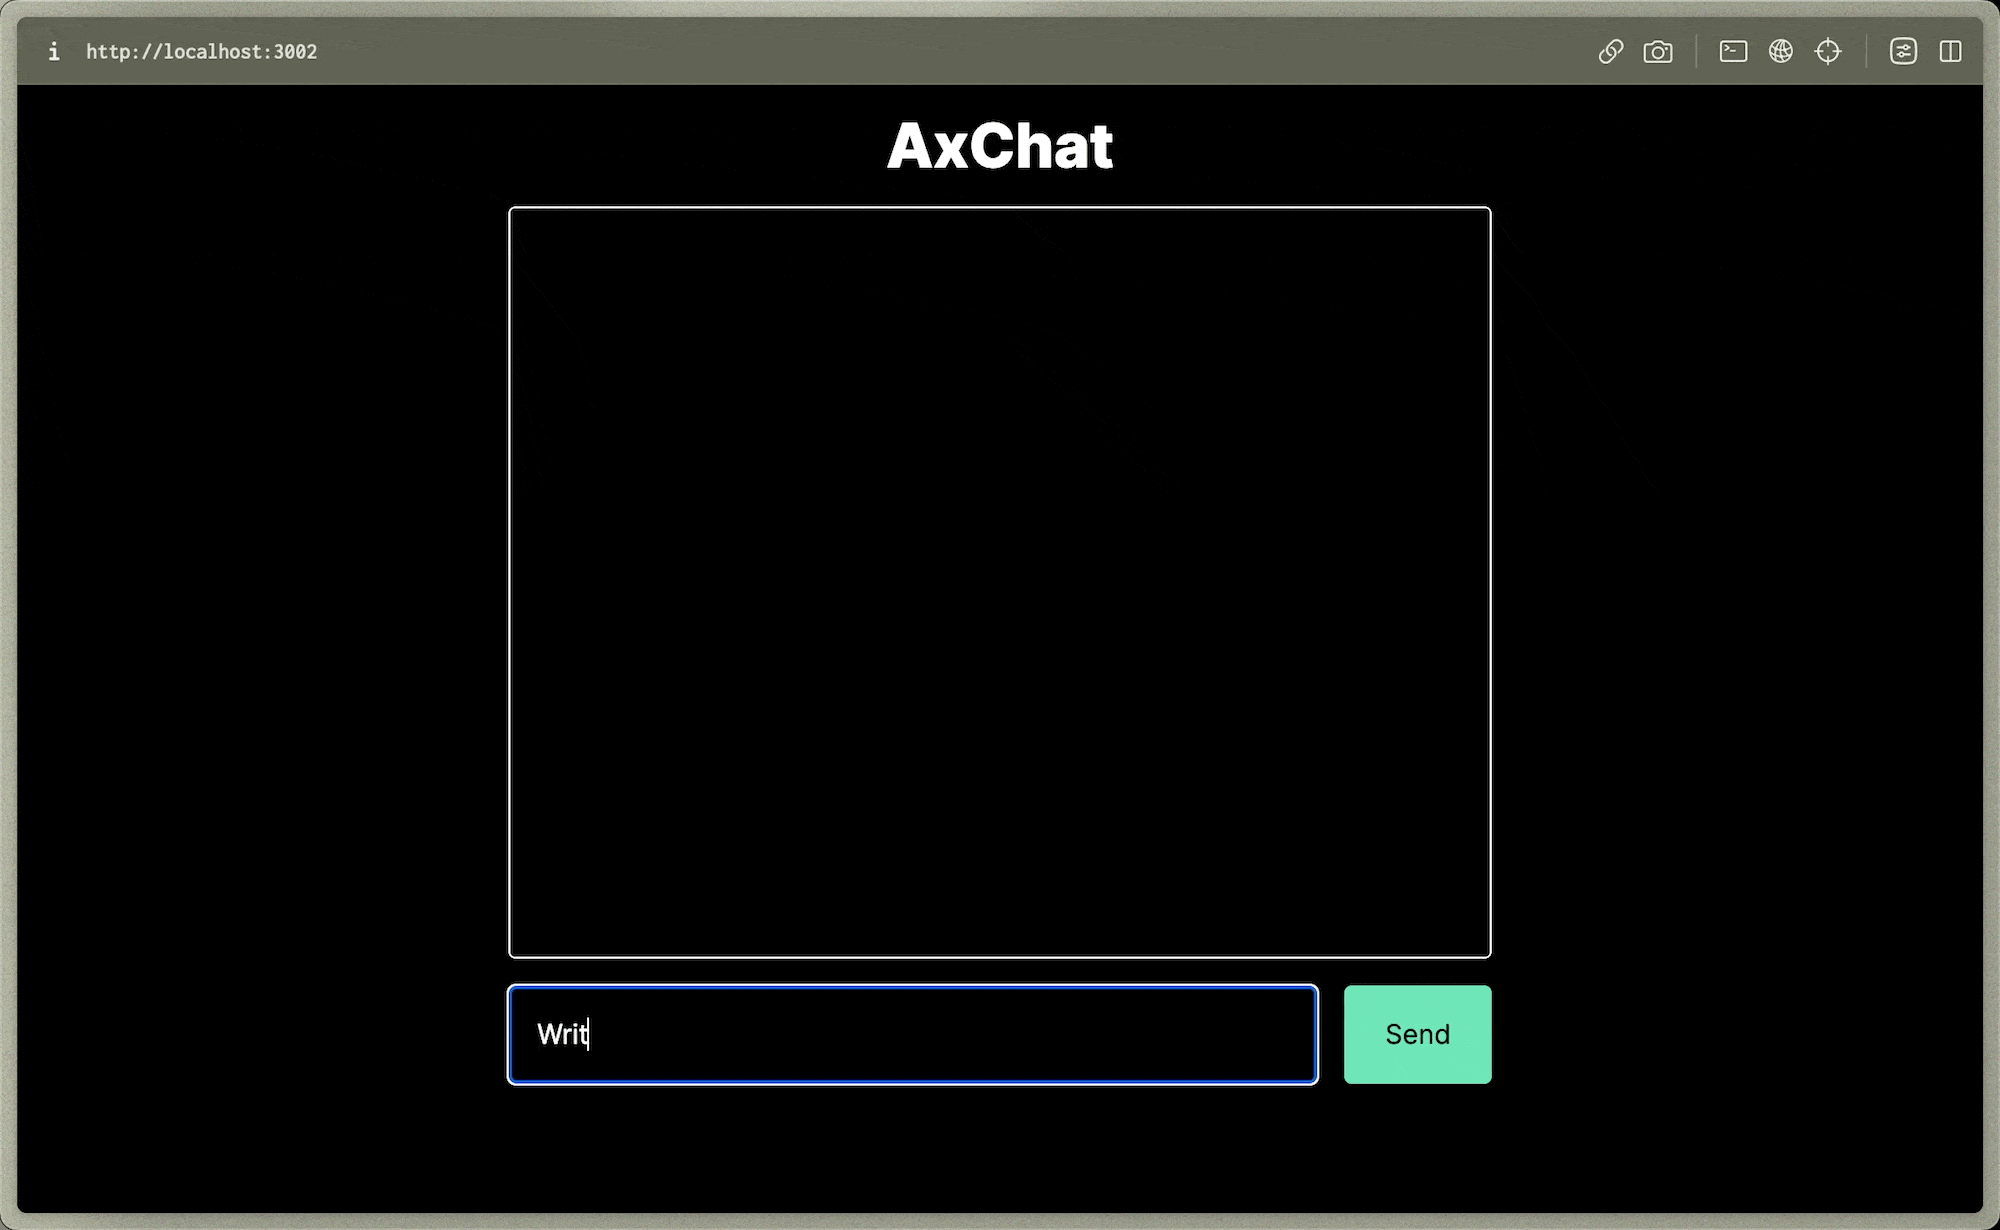 axchat in action